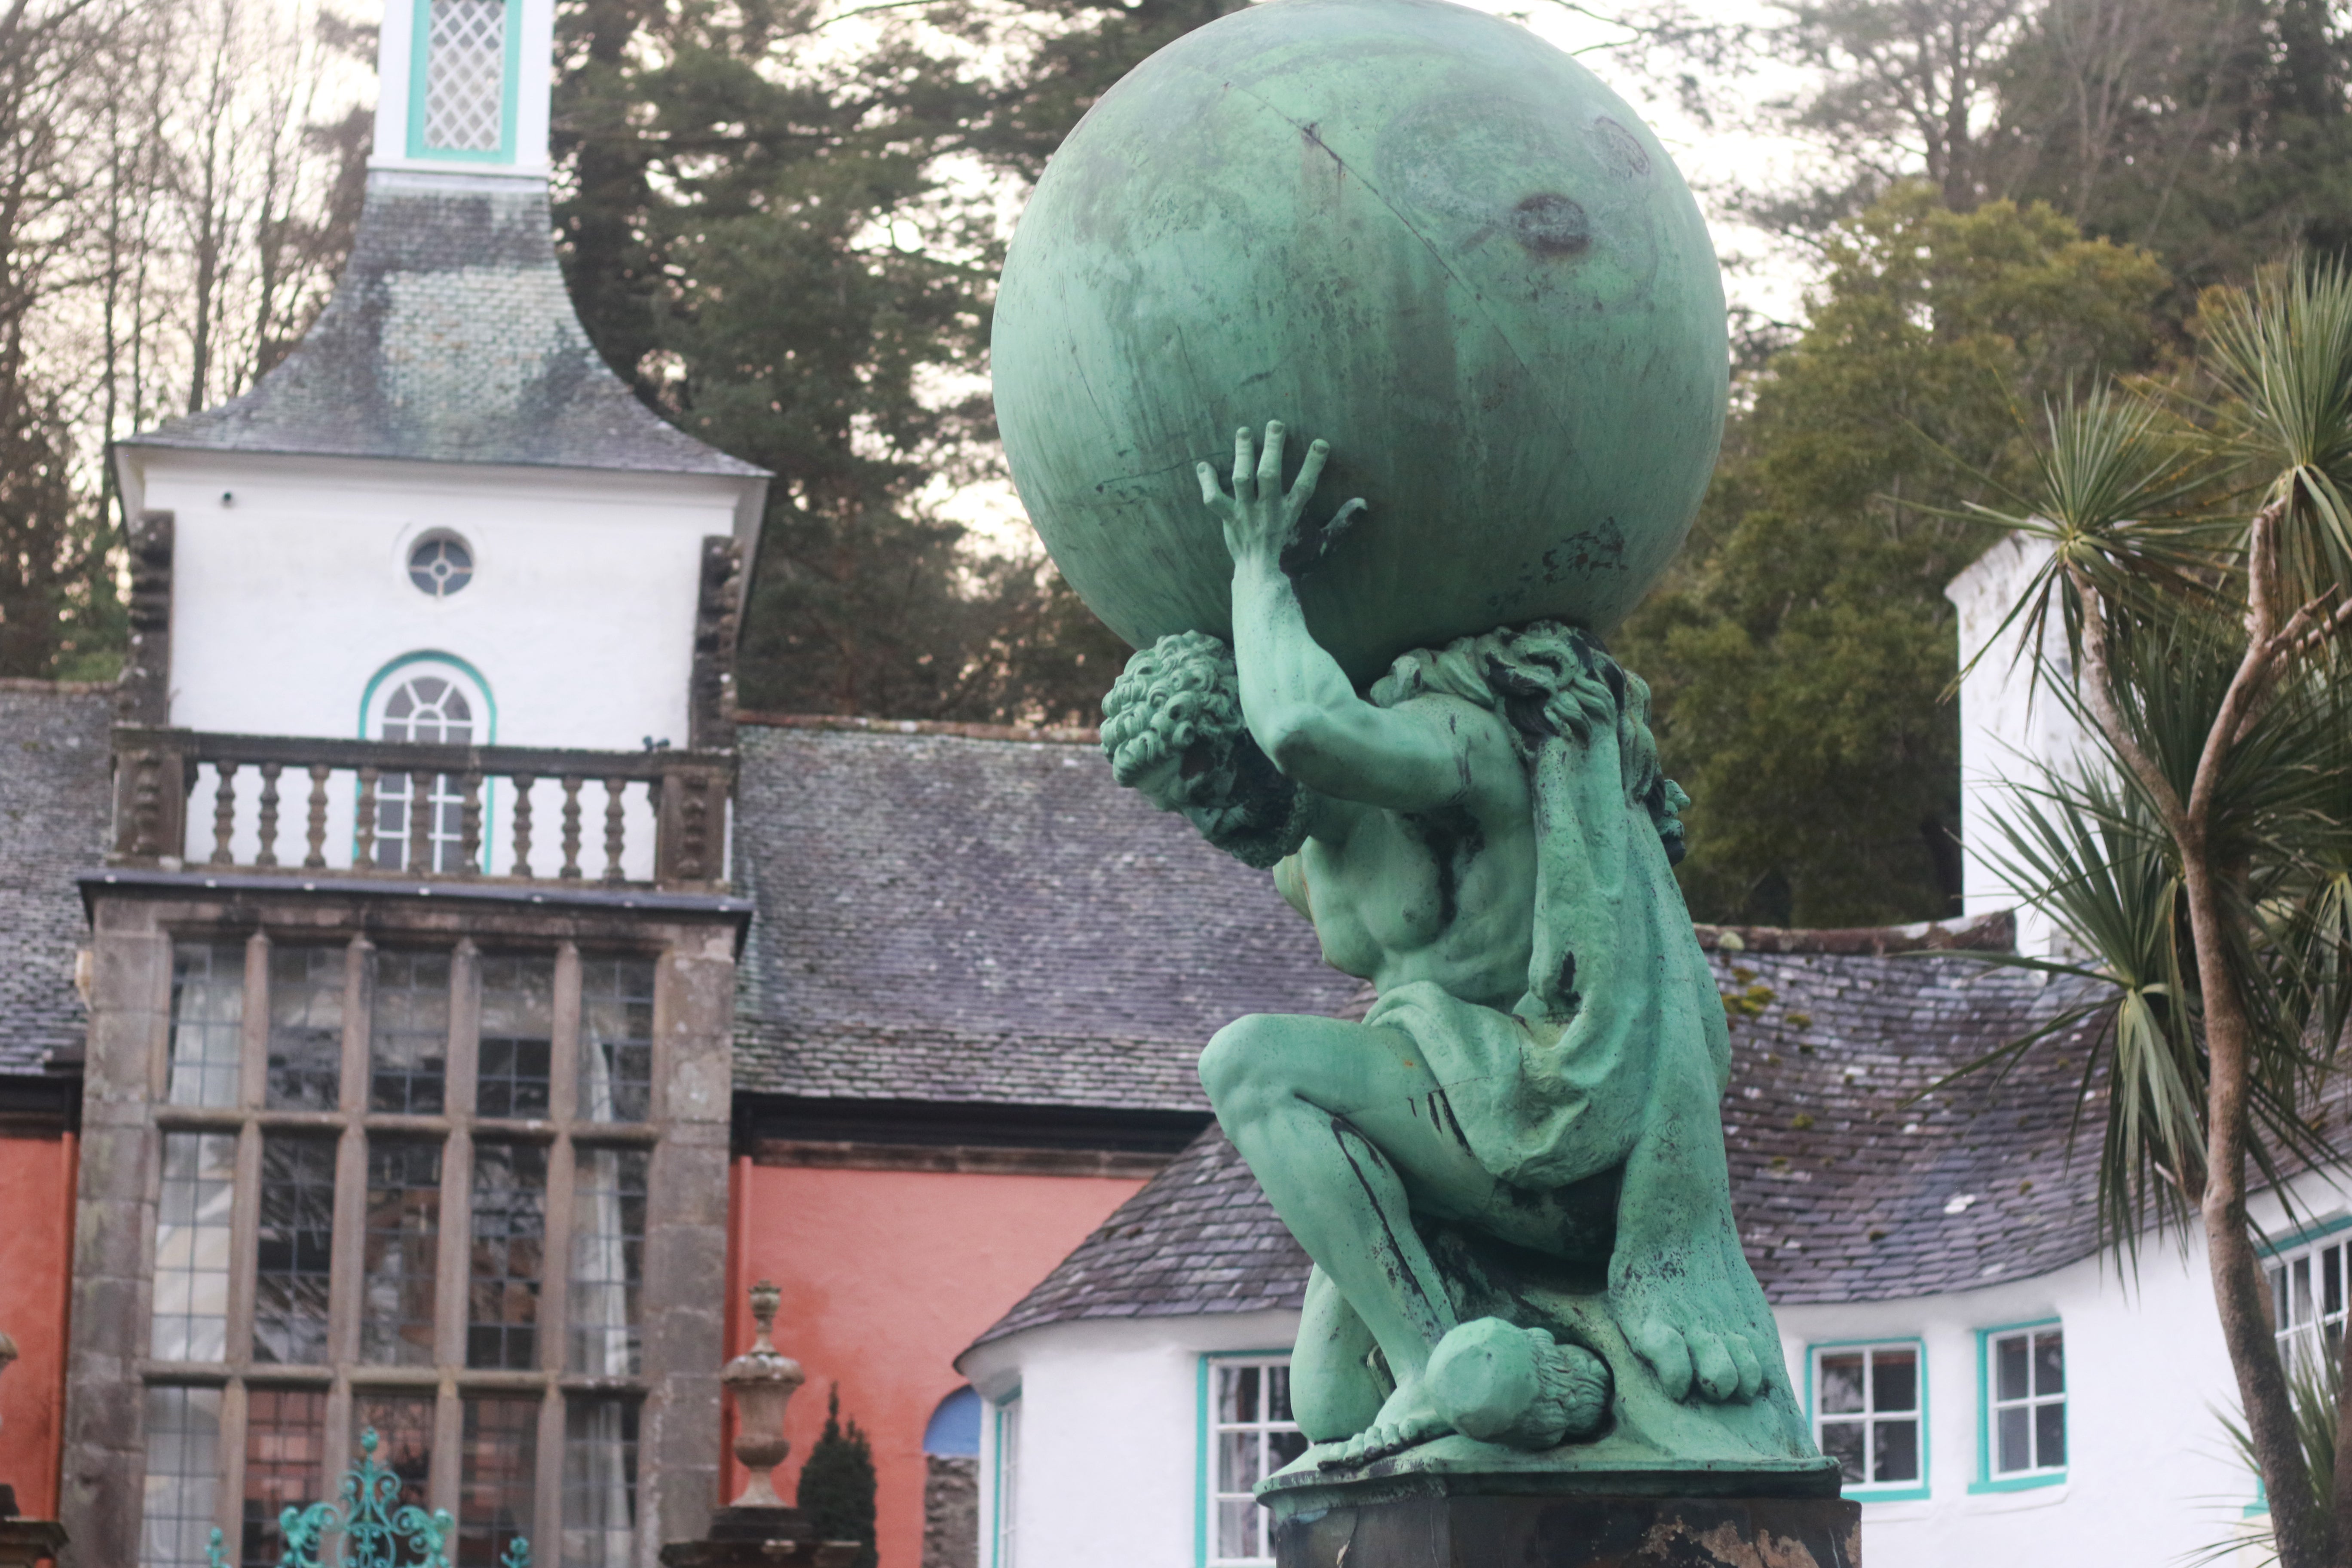 Portmeirion is a pastiche of Italian Renaissance, baroque, neoclassical, Palladian and Arts and Crafts styles